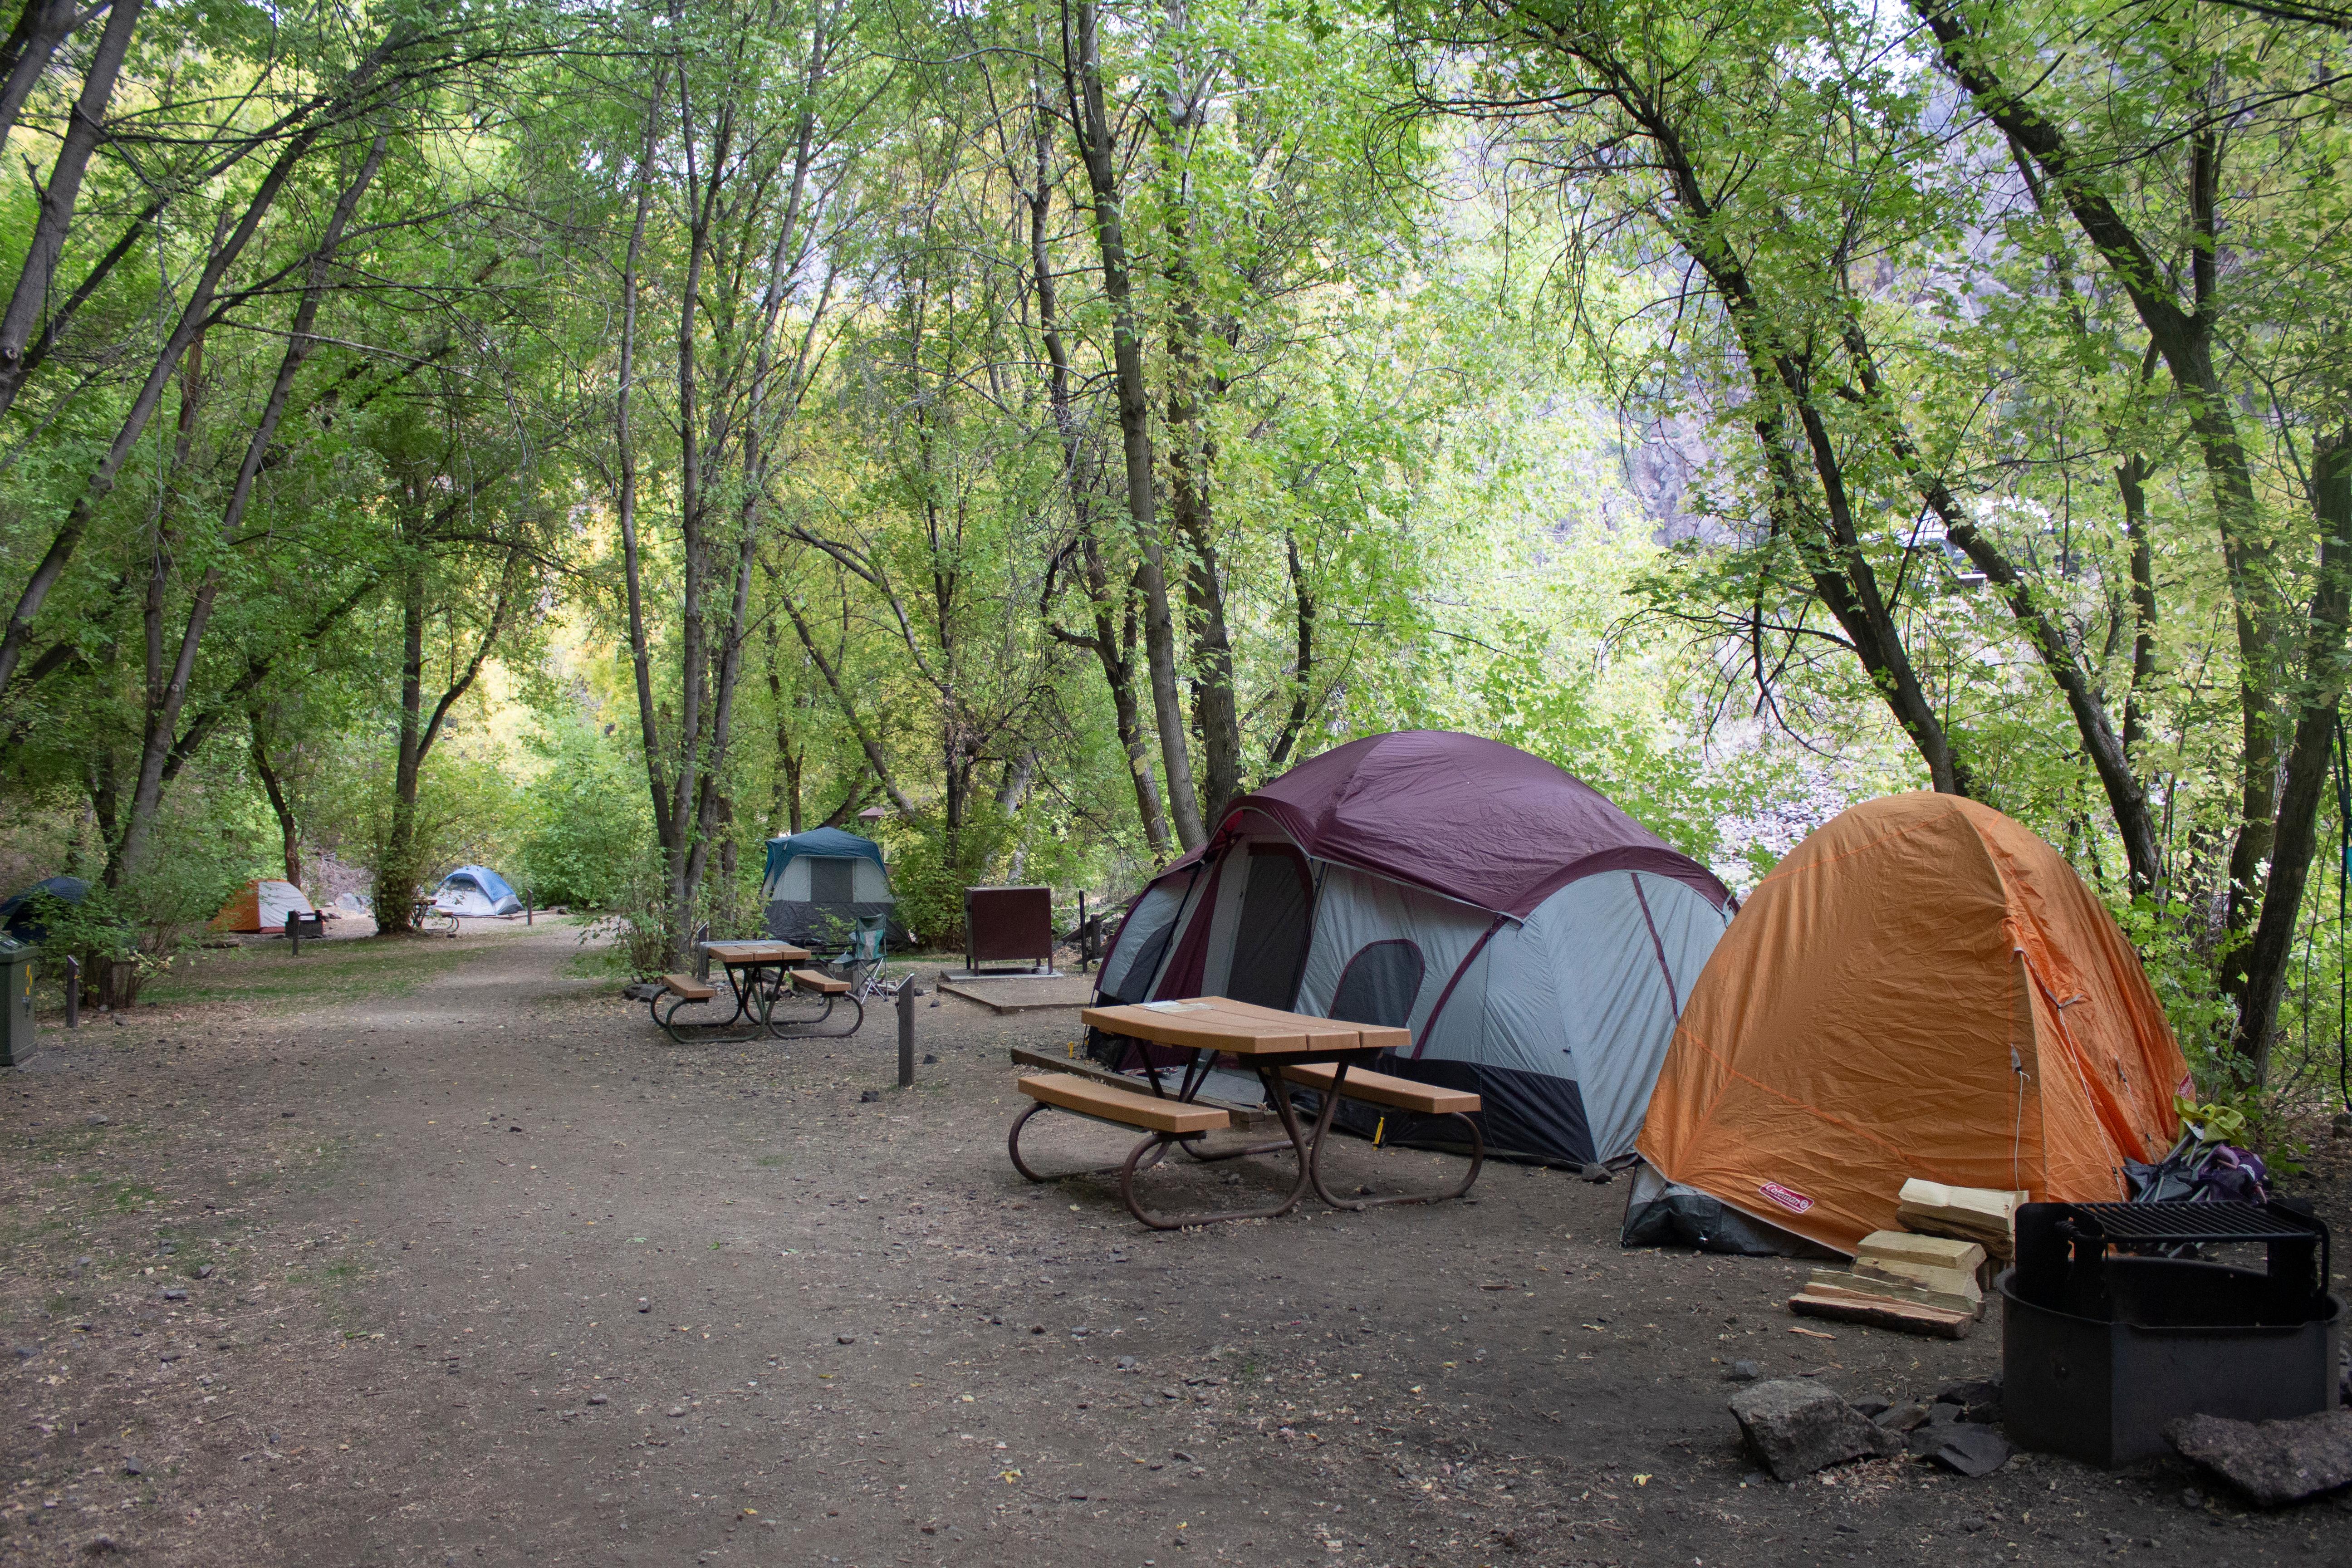 East Portal Campground - Walk-in sites